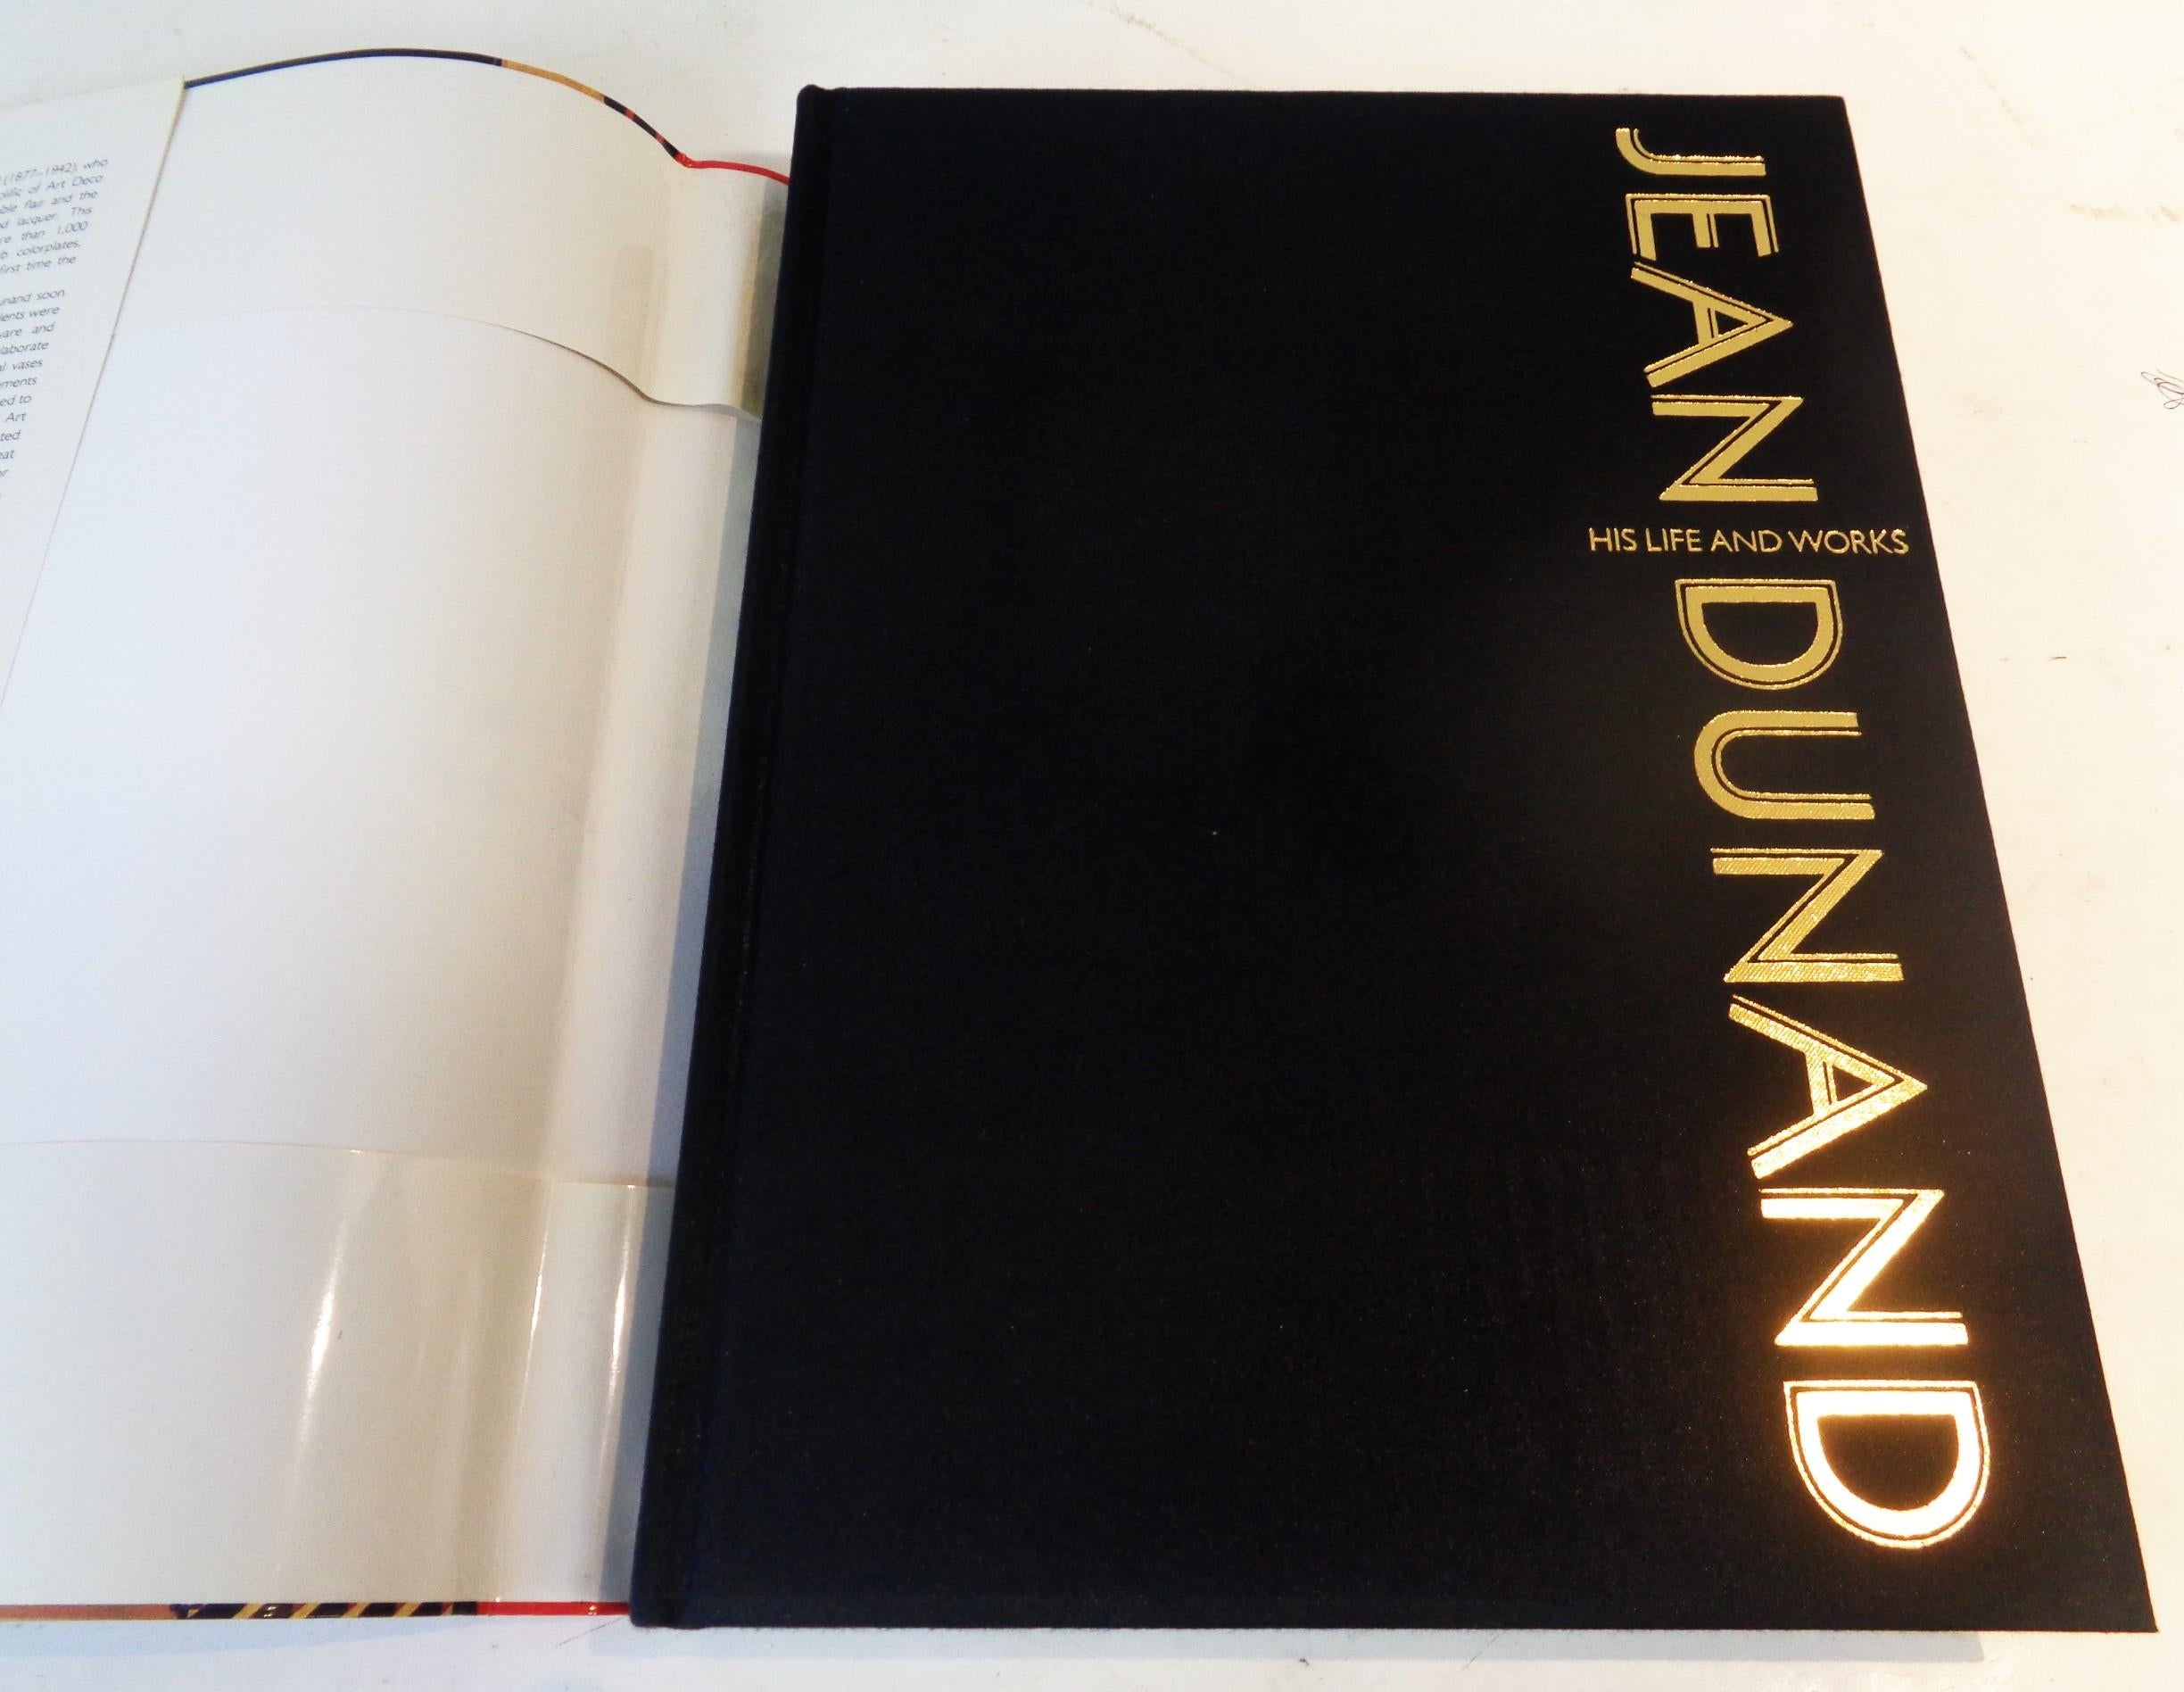 Jean Dunand - His Life and Works by Felix Marcilhac  - 1991 Harry Abrams Publishers. Harcover black cloth book w/ gilt lettering and dust jacket. English translation - Contents - Jean Dunand His Life and Career / Aspects of Jean Dunand's Oeuvre /